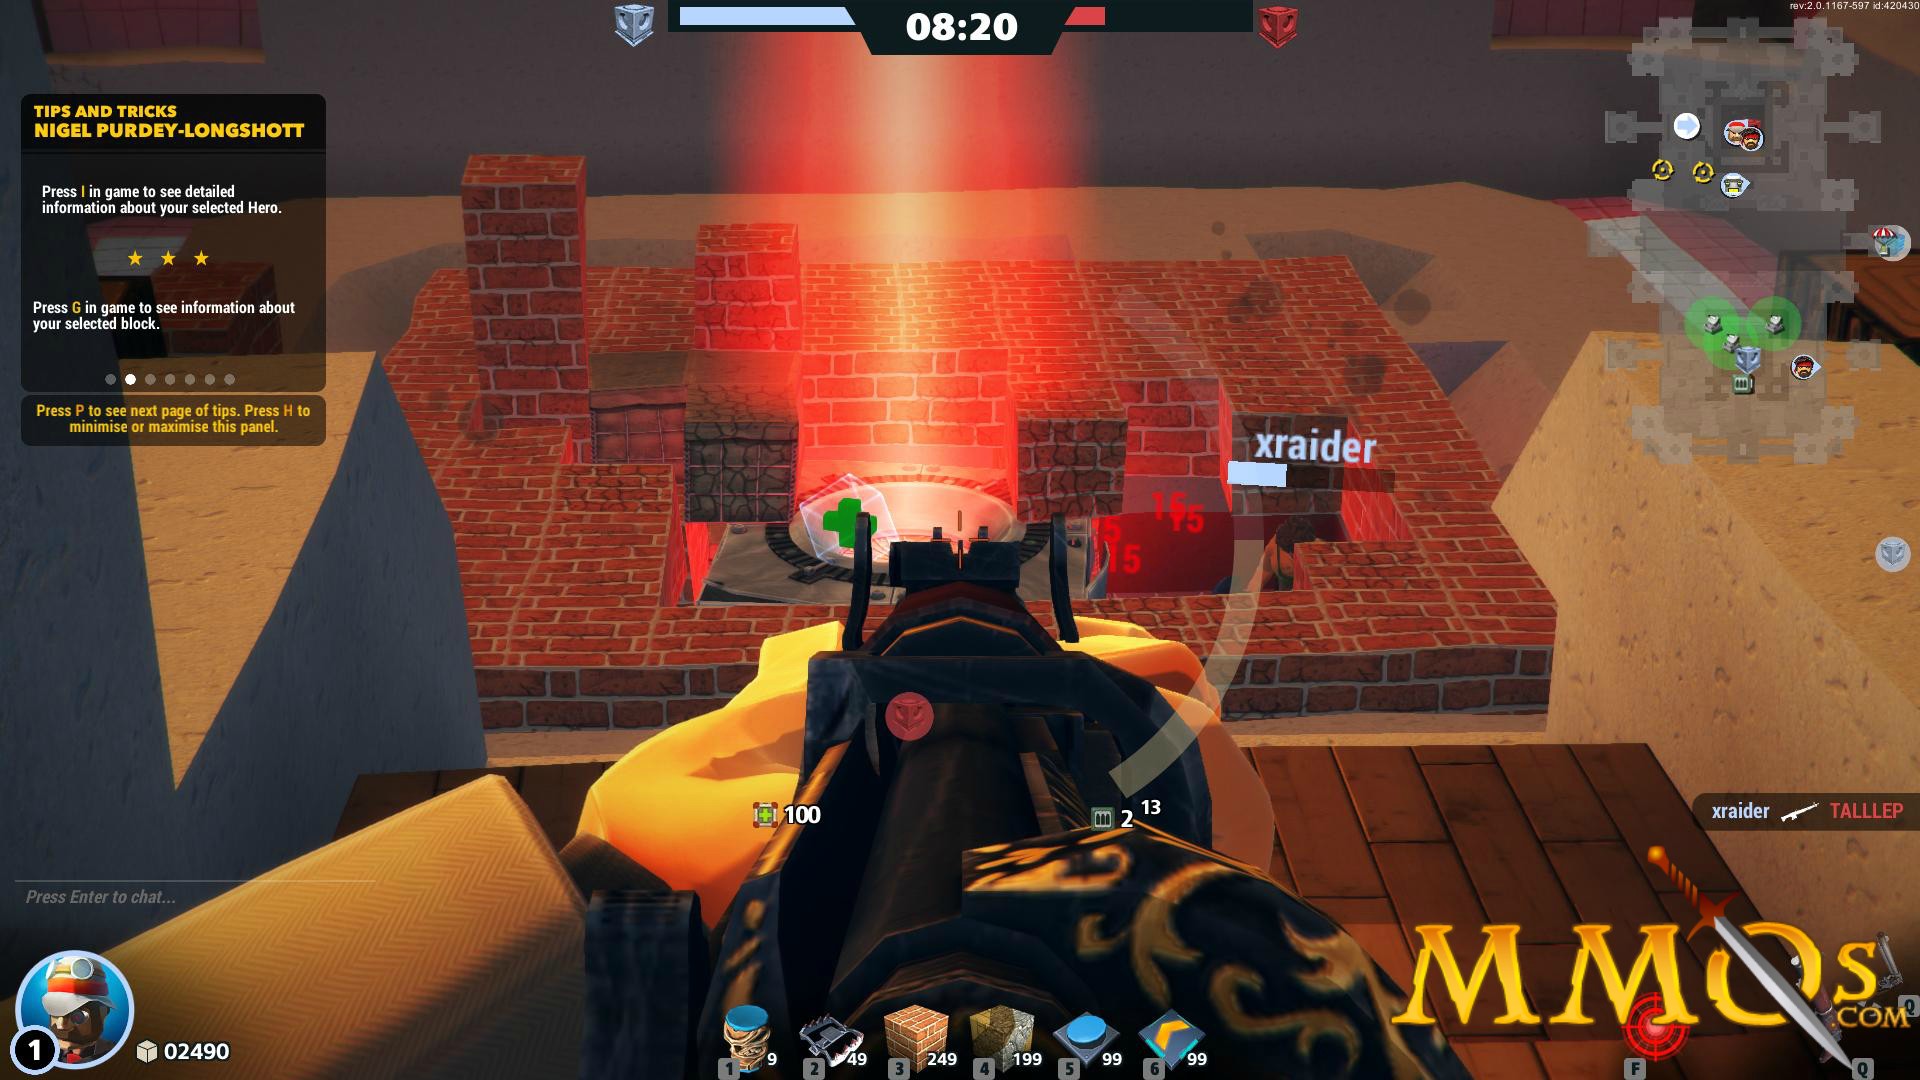 Minecraft + Team Fortress-Style PC Game Block N Load Launches Today -  GameSpot